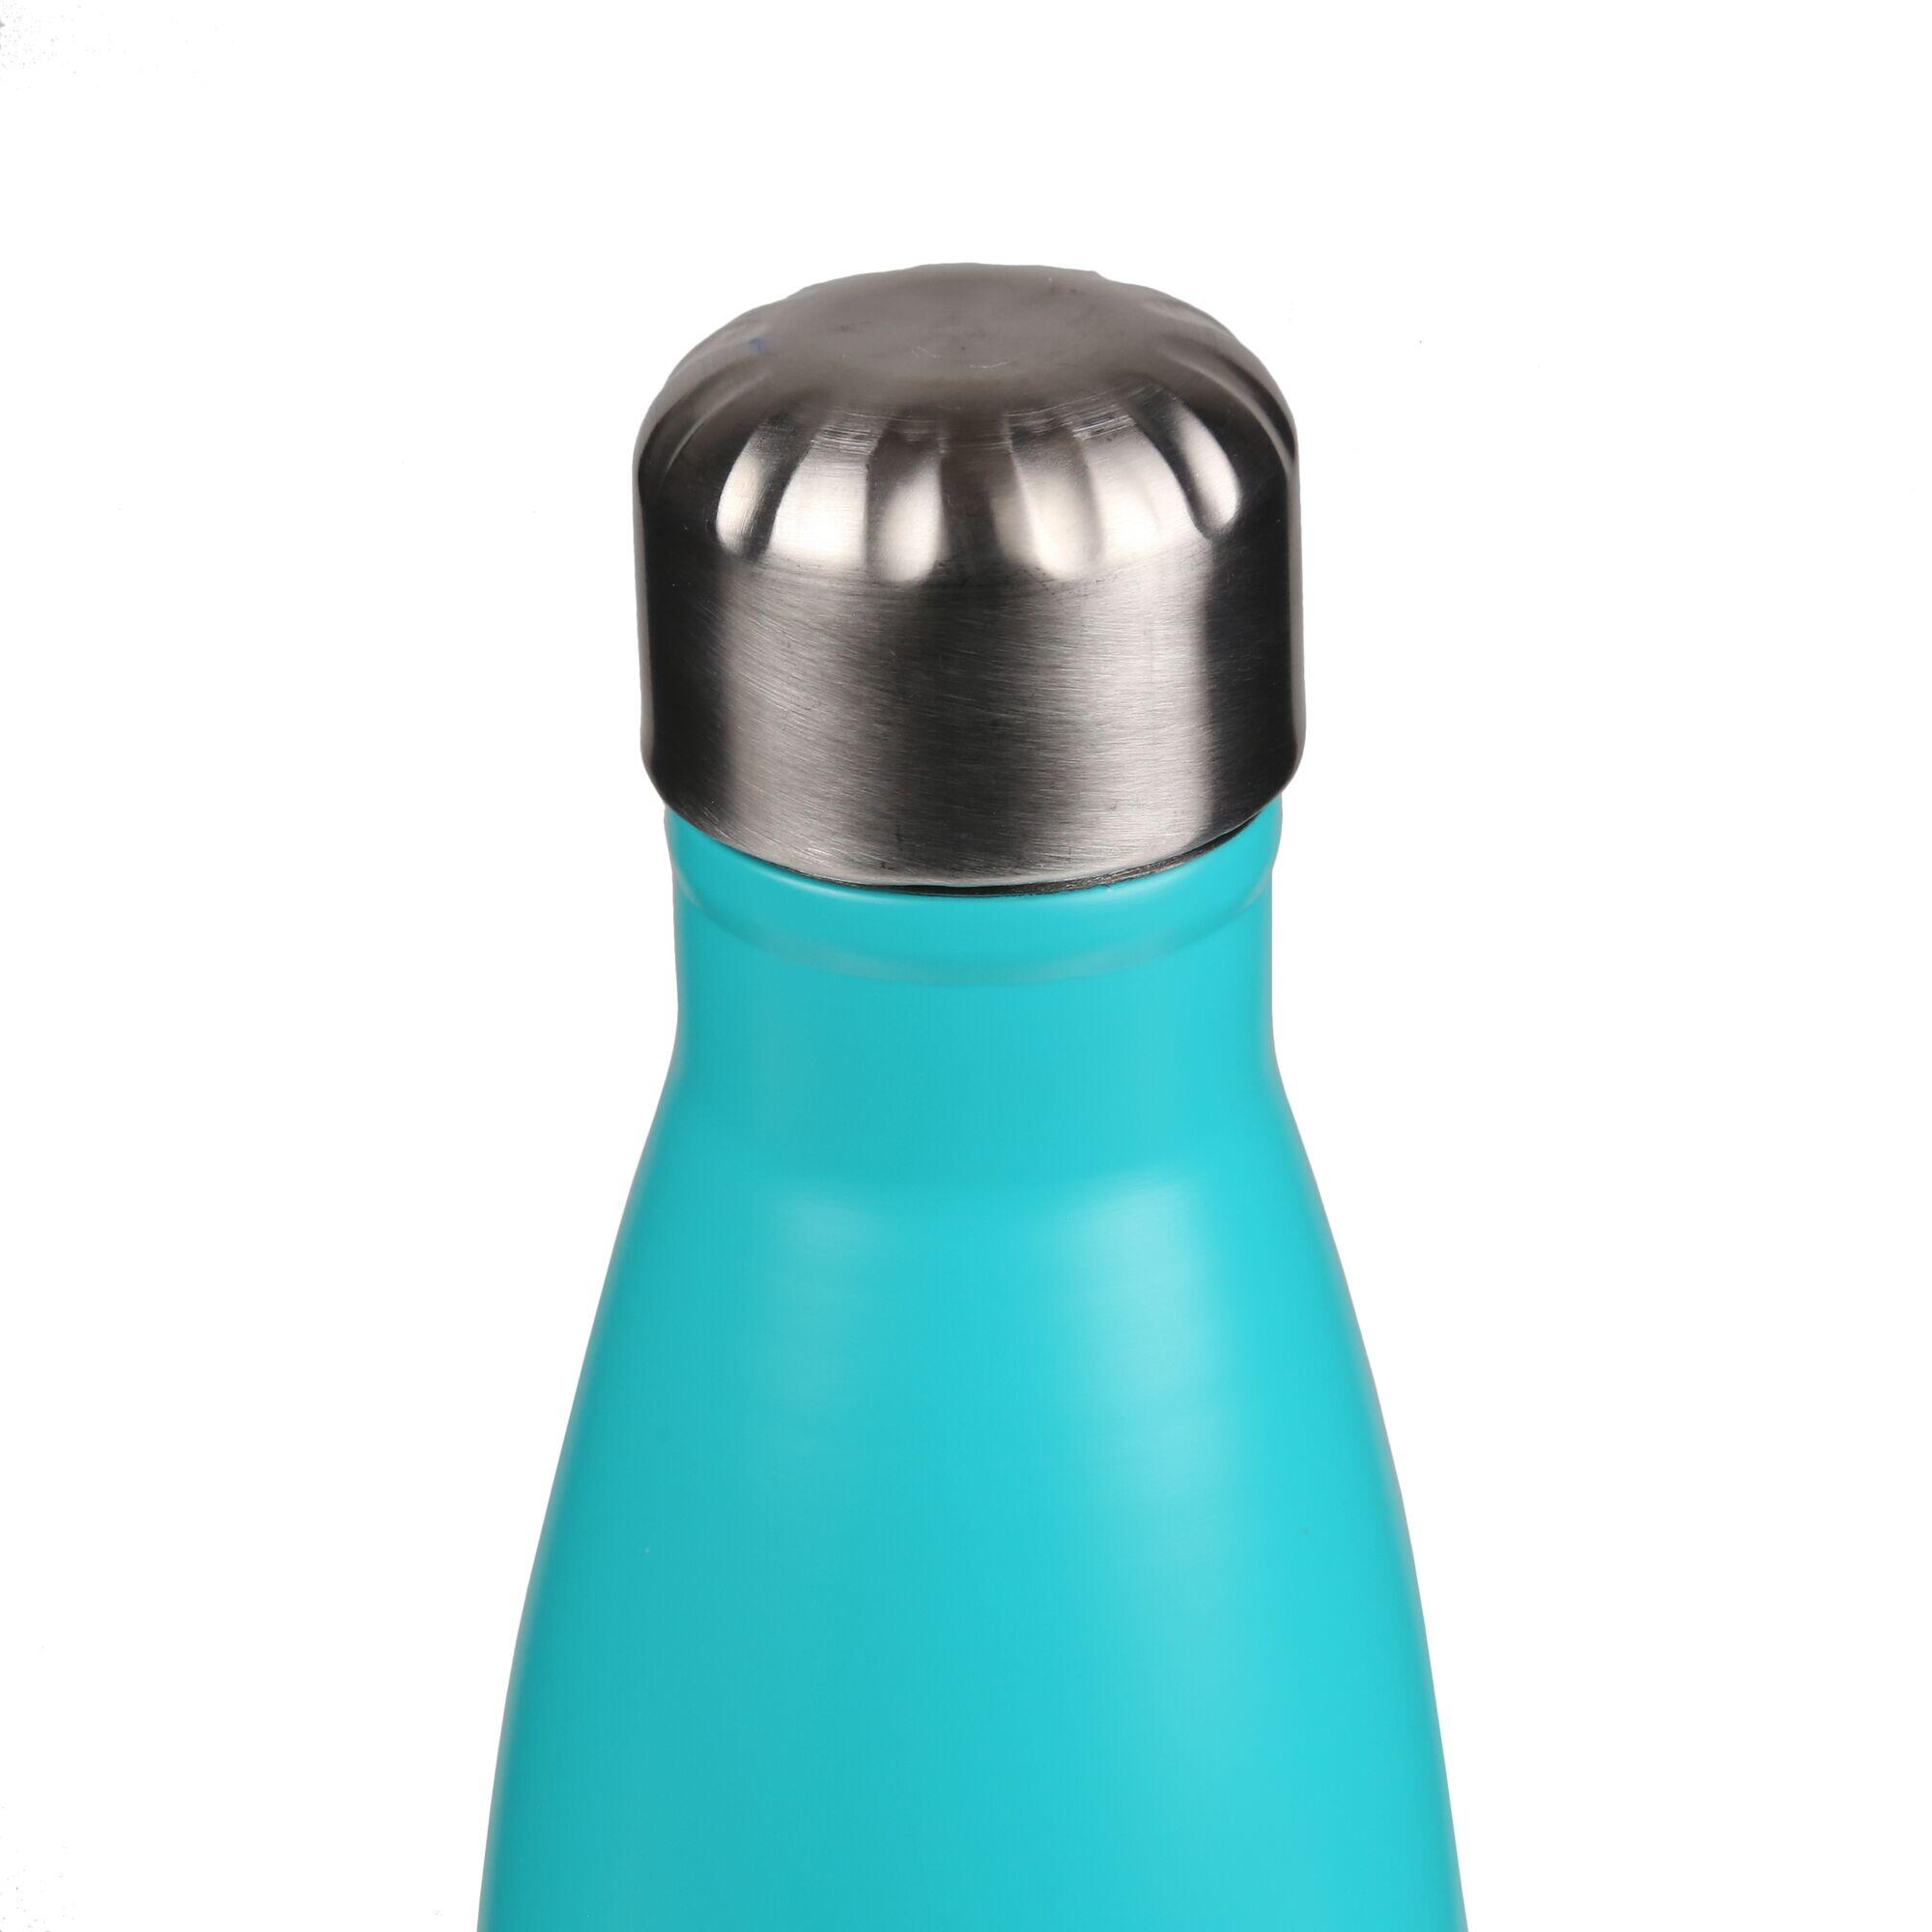 0.5L Adults' Camping Drinking Bottle - Ceramic Blue 2/5